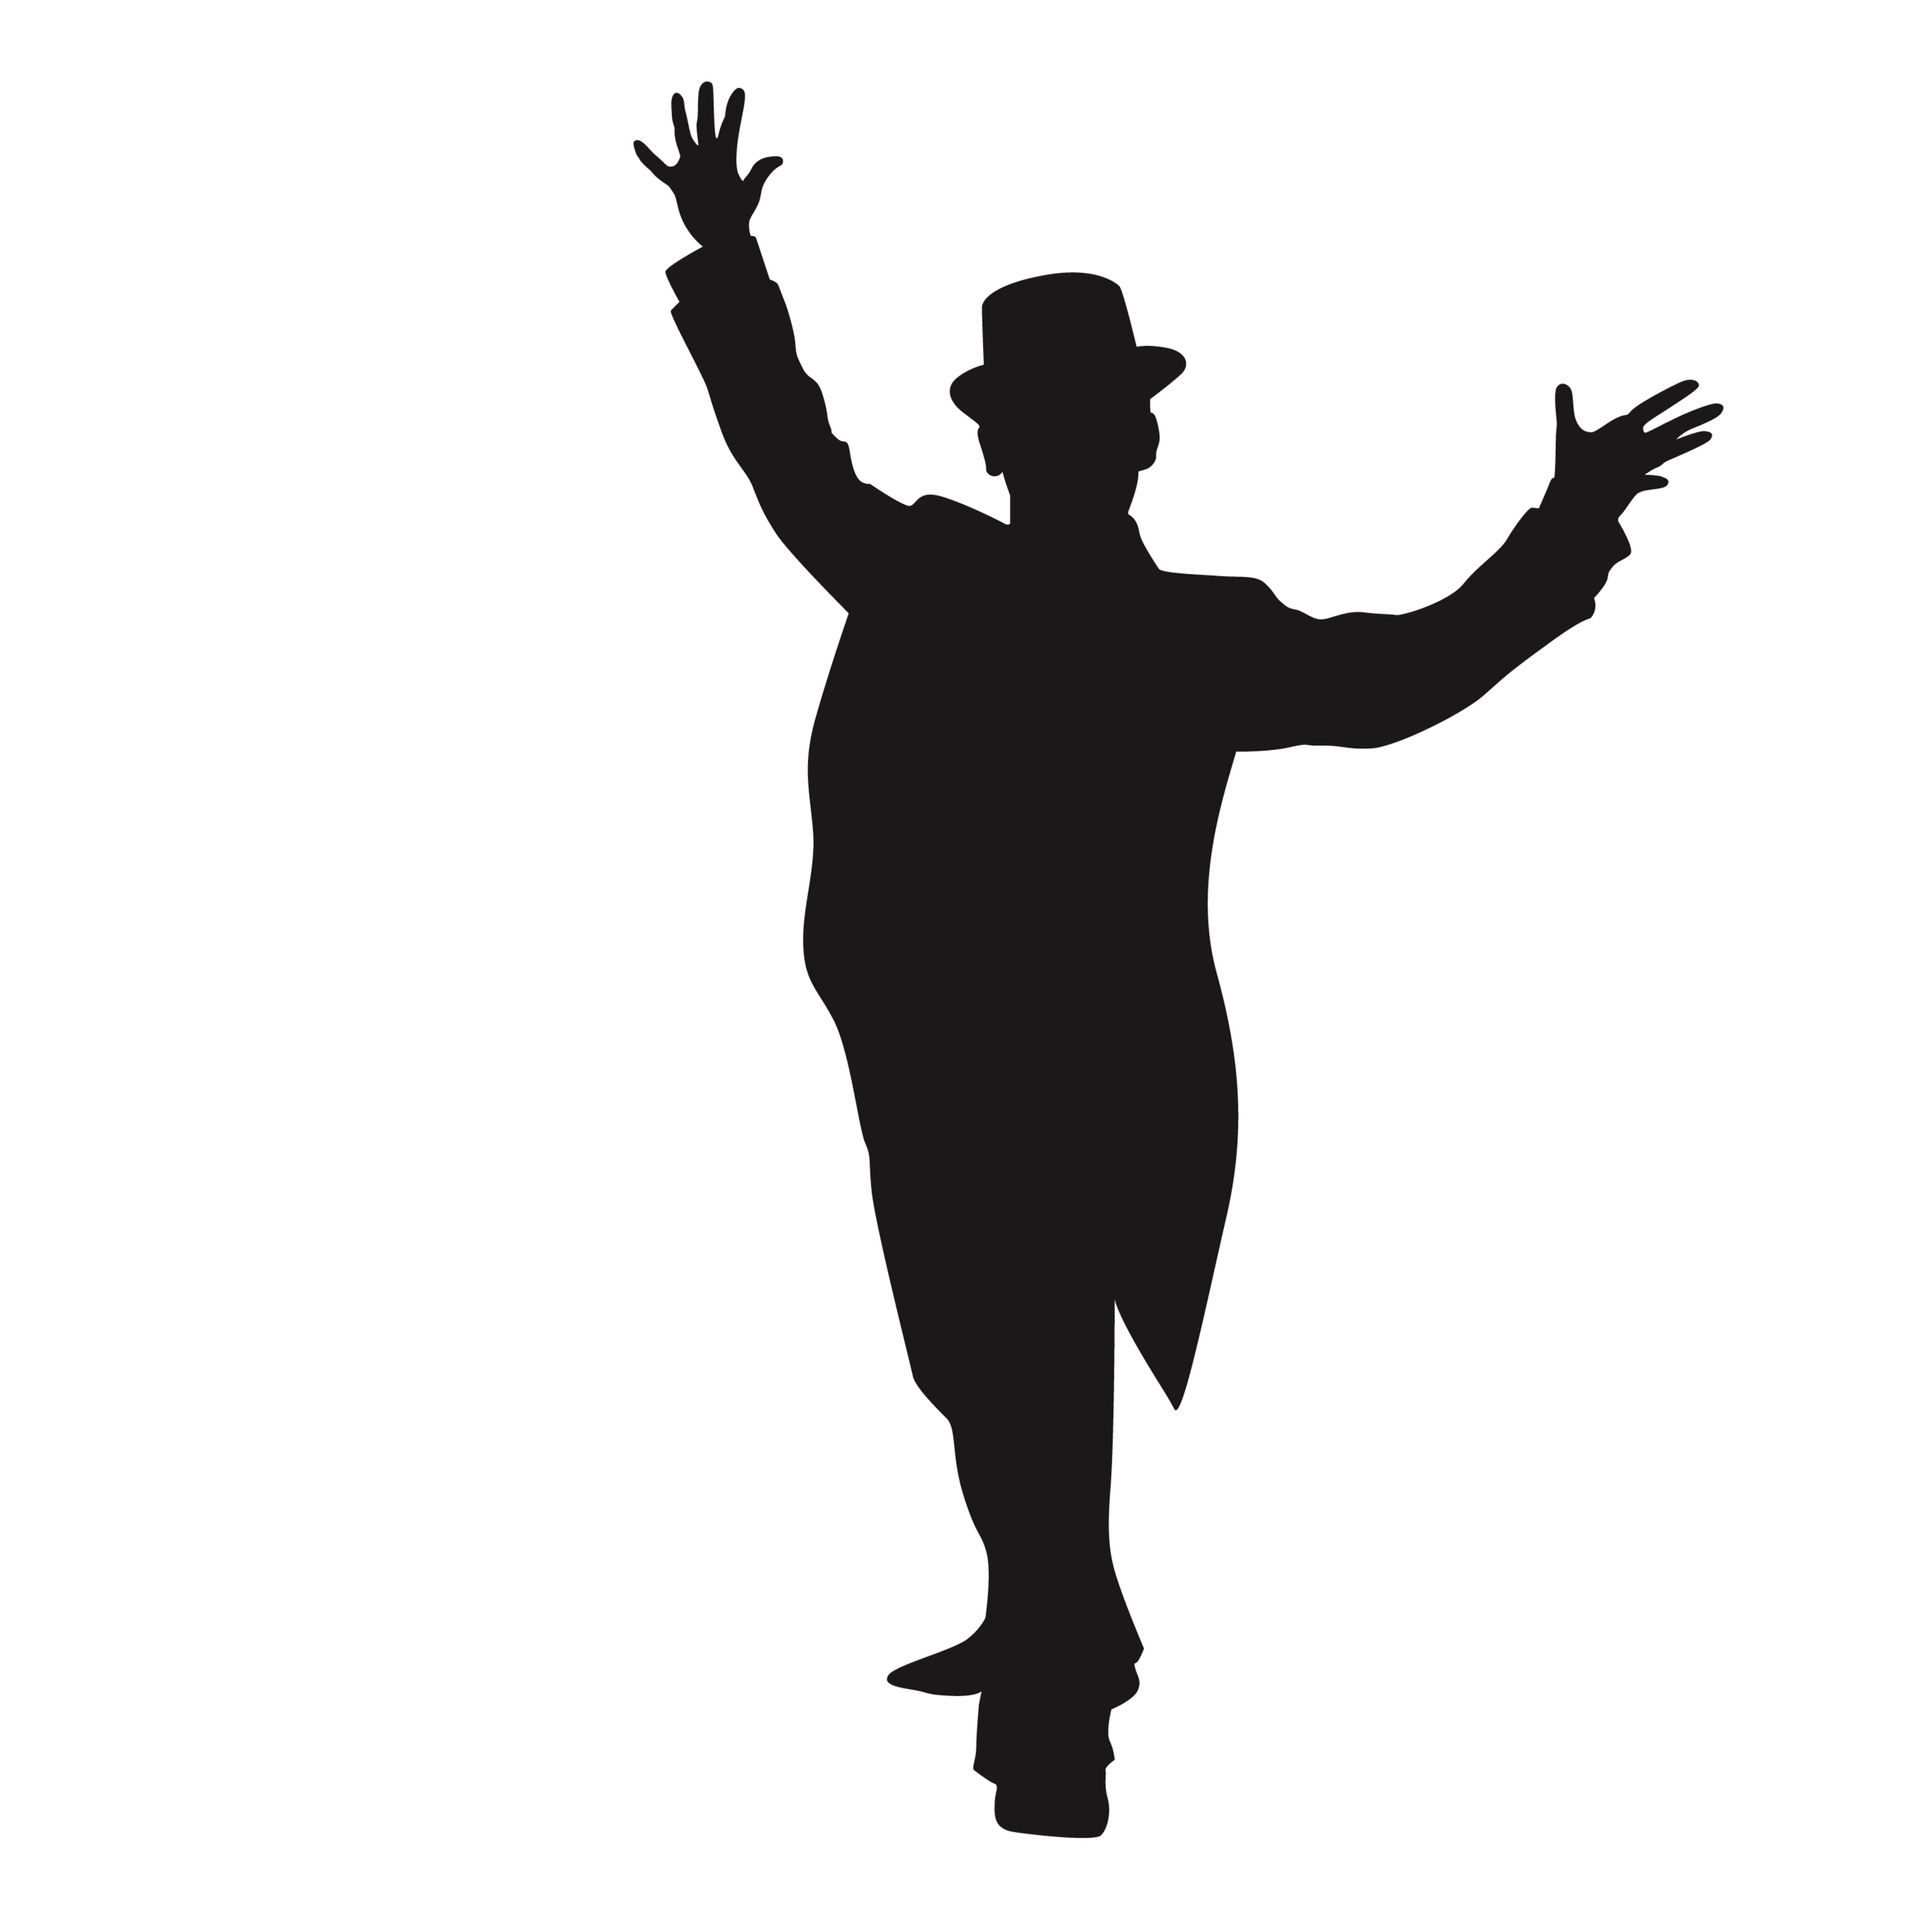 A silhouette of a man in a top hat with his arms outstretched.